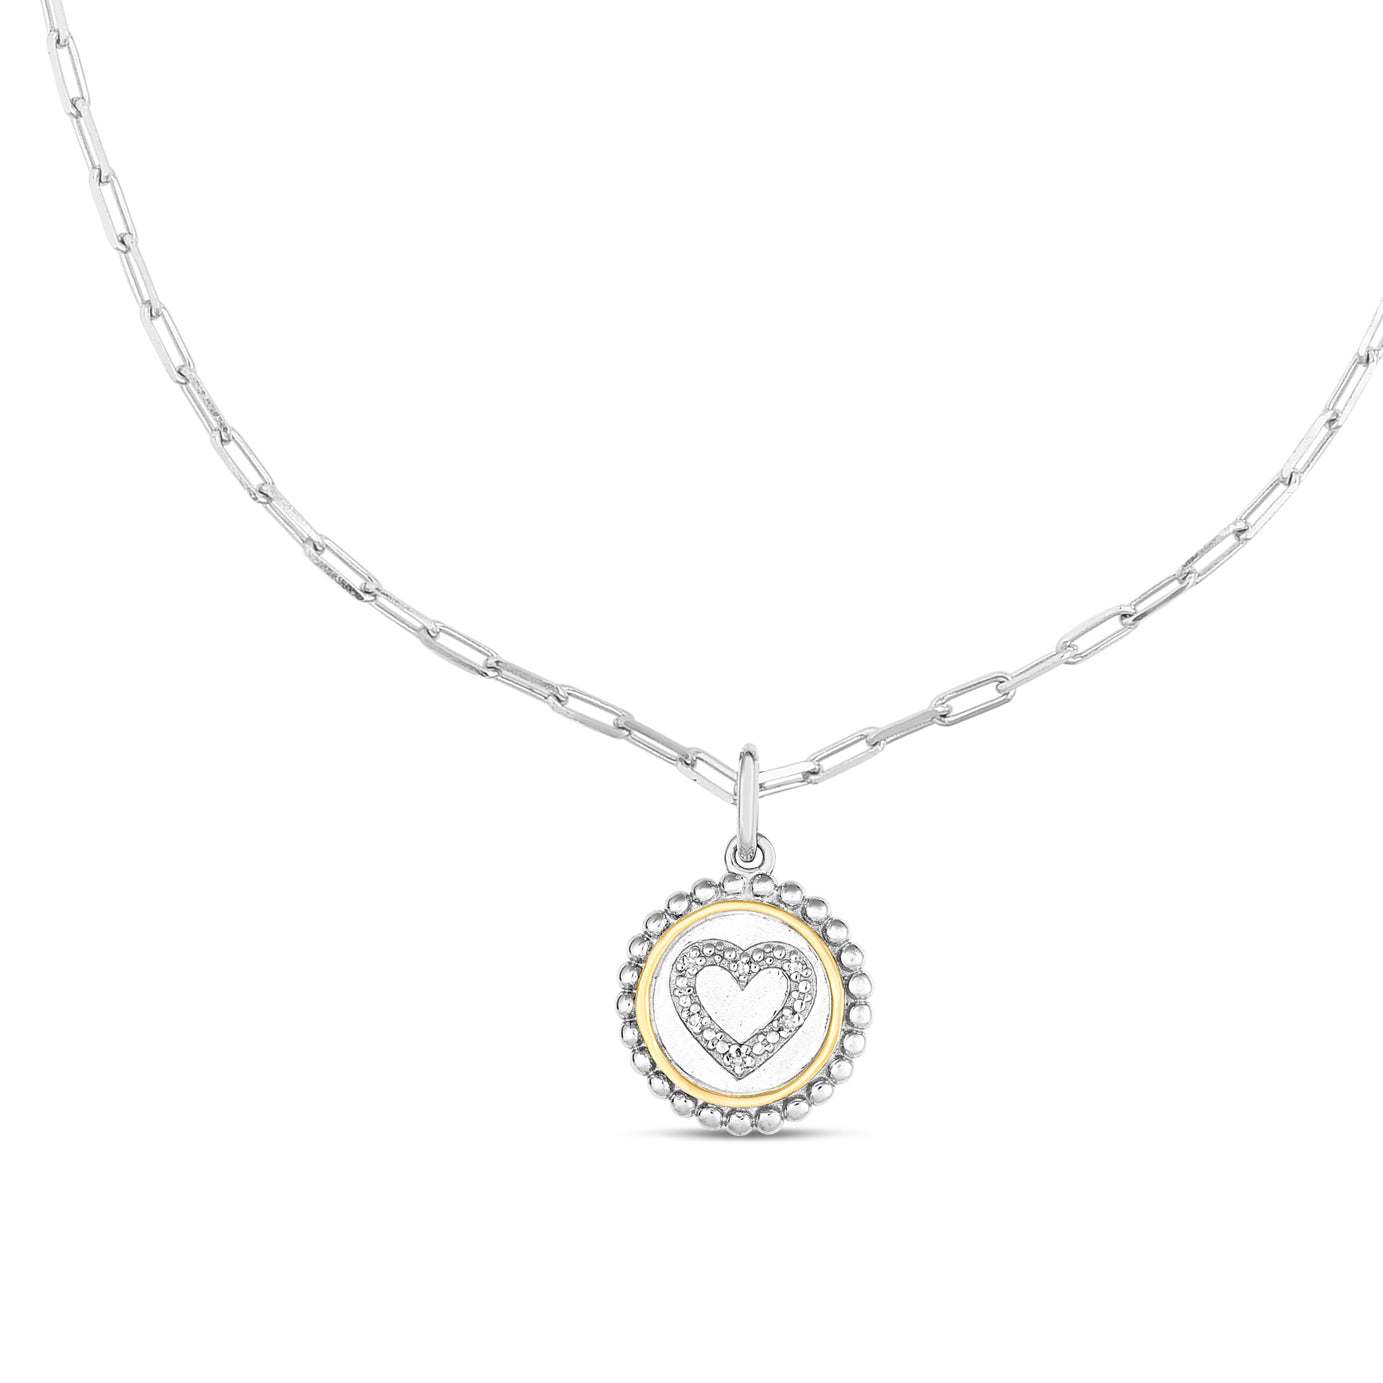 18K Gold & Sterling Silver Heart Pendant with White Diamonds on Paperclip Chain